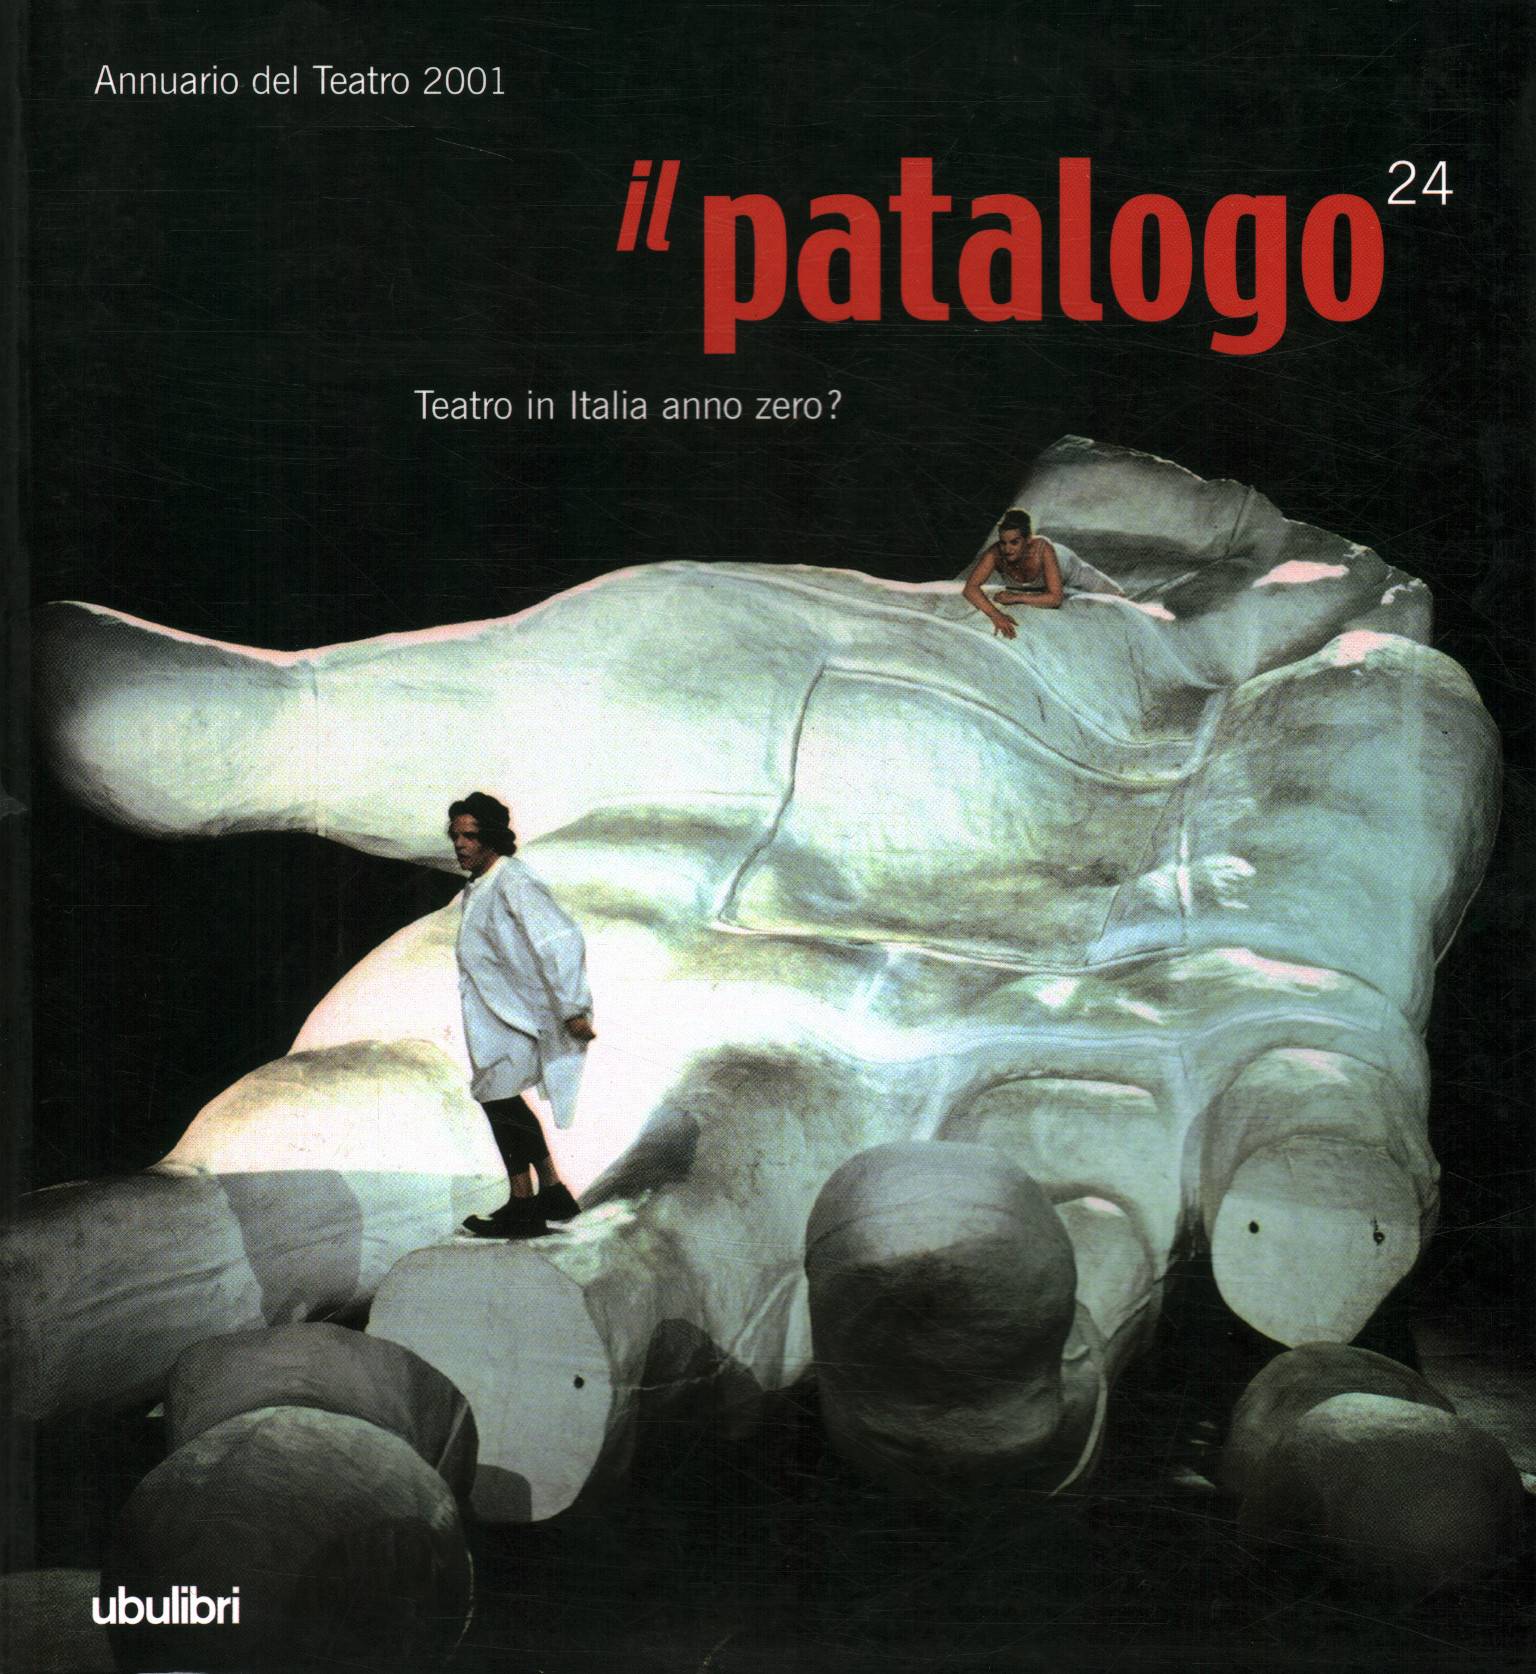 Il Patologo 24. Theater in Italy year%, Il Patalogo 24. Theater in Italy year%, Il Patalogo twenty-four. Theater in Italy